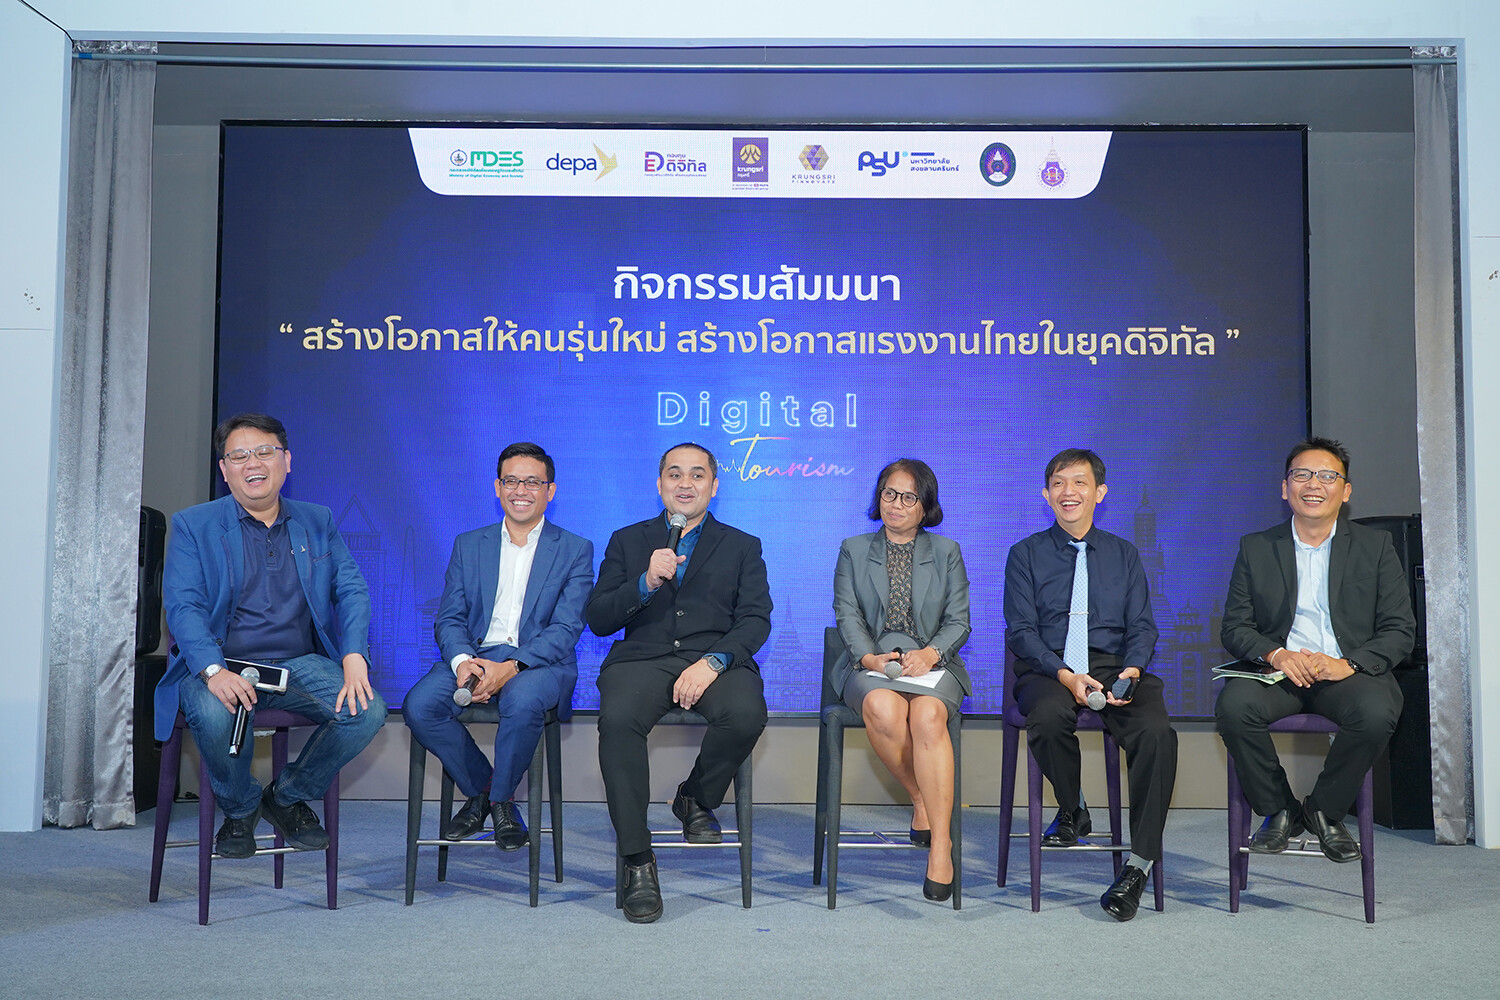 depa Joins with Partners Continue an Effort on Thai Tourism Recovery, Organizing Digital Proficiency Workshop and Short Courses for IT Developers at the Southern Roadshow